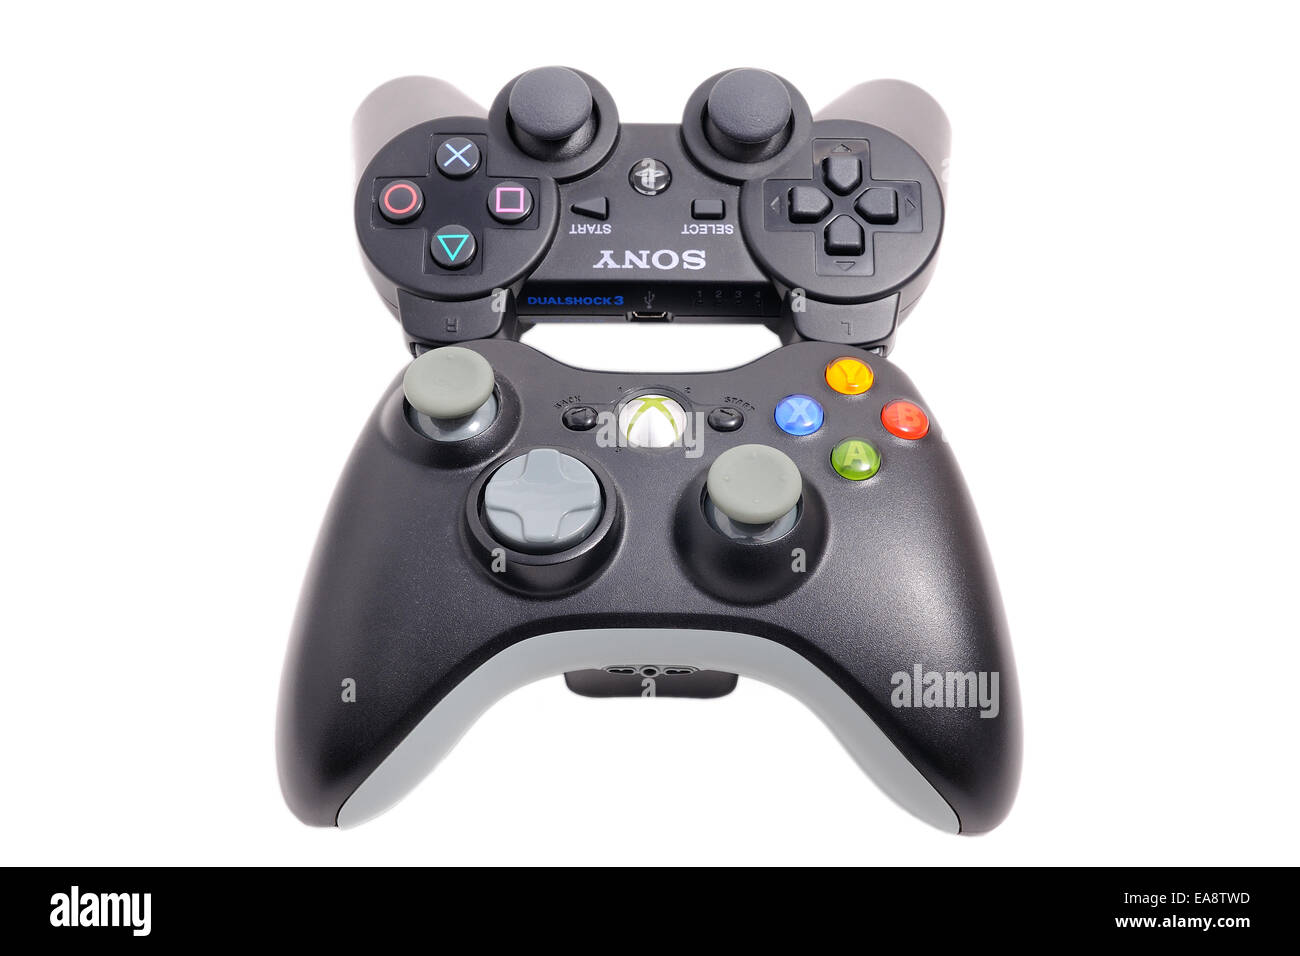 BARCELONA, SPAIN - APR 18, 2014: The DualShock 3 wireless controller, in front of its big rival of Microsoft Xbox 360. Stock Photo